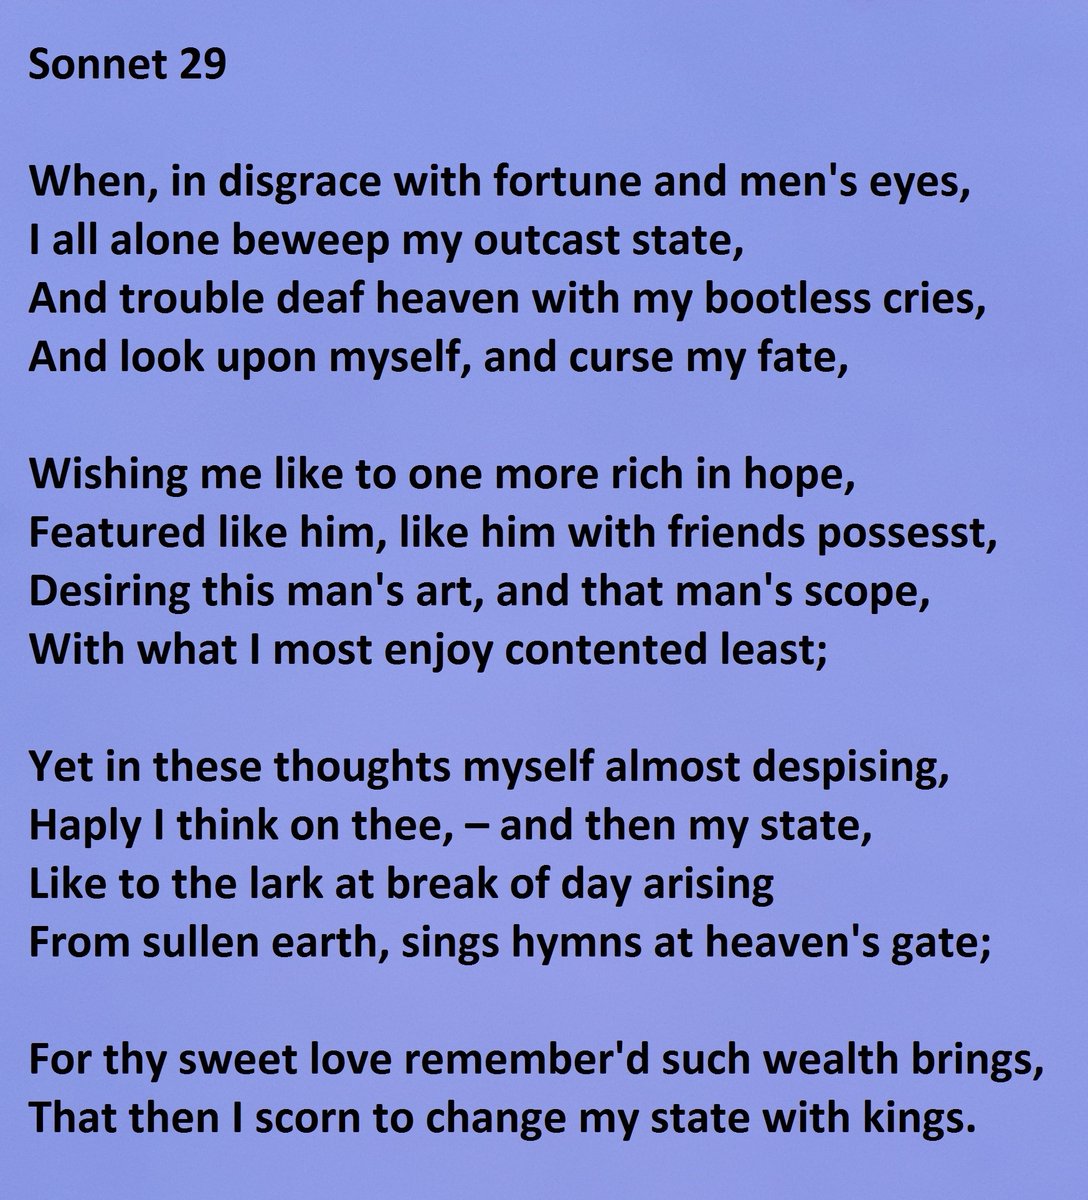 Sonnet 29 by William Shakespeare - "When, in disgrace with fortune and men's eyes"